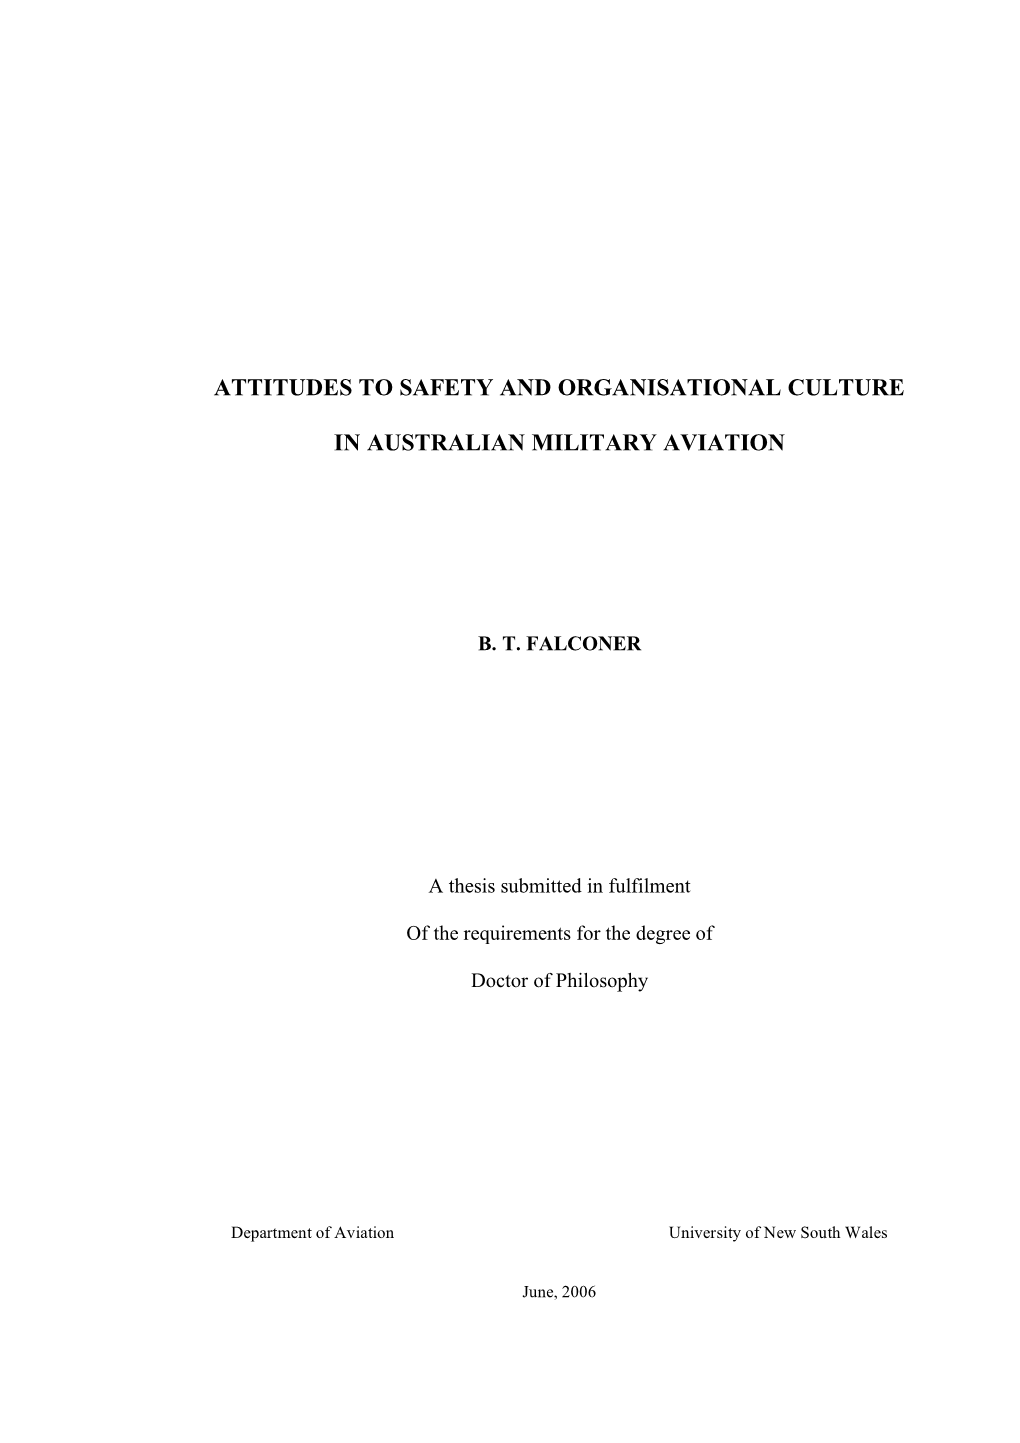 Attitudes to Safety and Organisational Culture in Australian